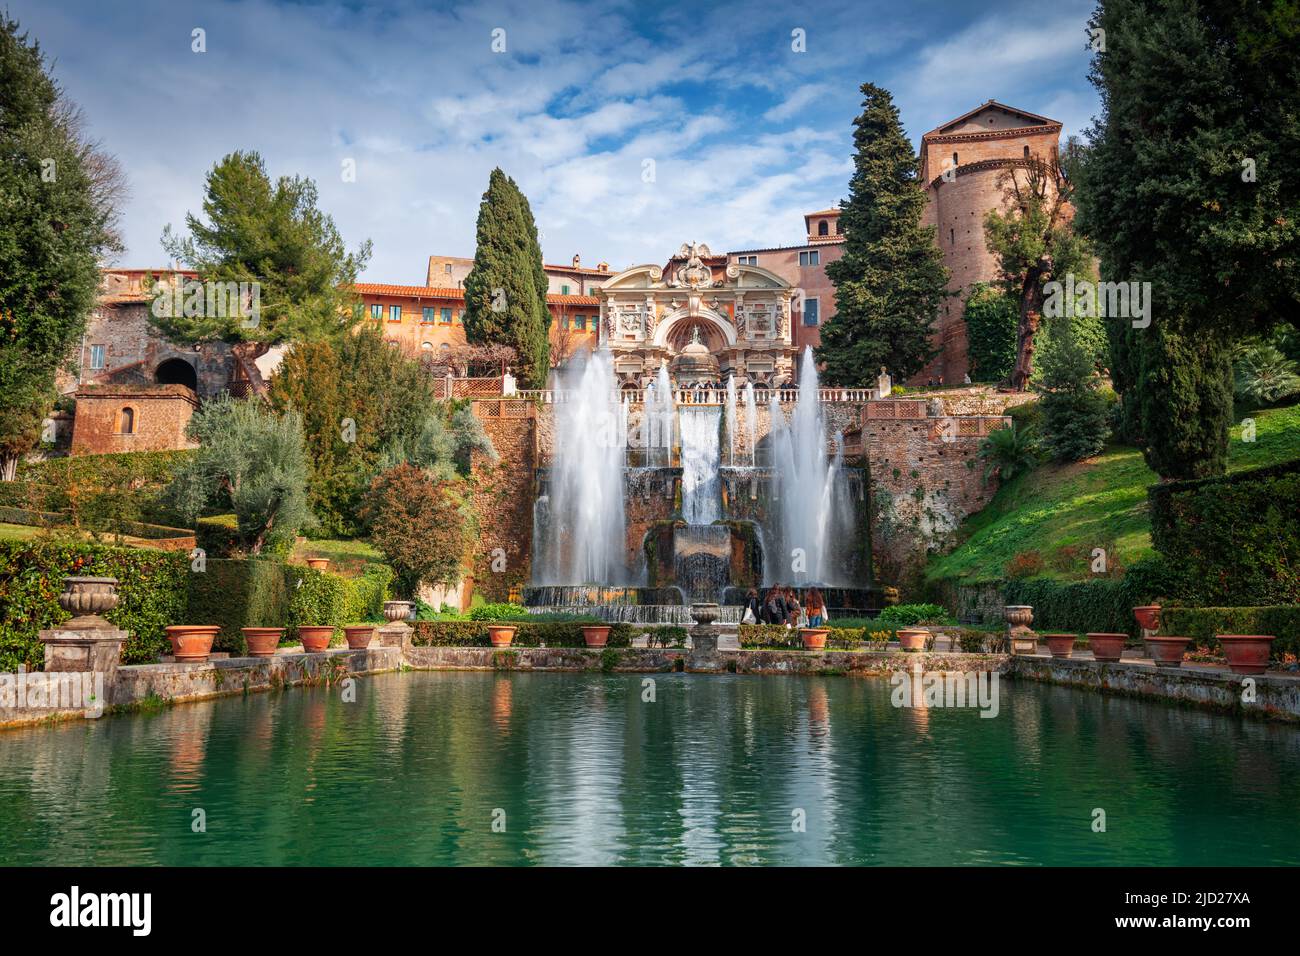 TIVOLI, ITALY - FEBRUARY 5, 2022: Visitors enjoy waterworks at Villa D'Este. The 16th century villa is now a museum and an UNESCO World Heritage site. Stock Photo